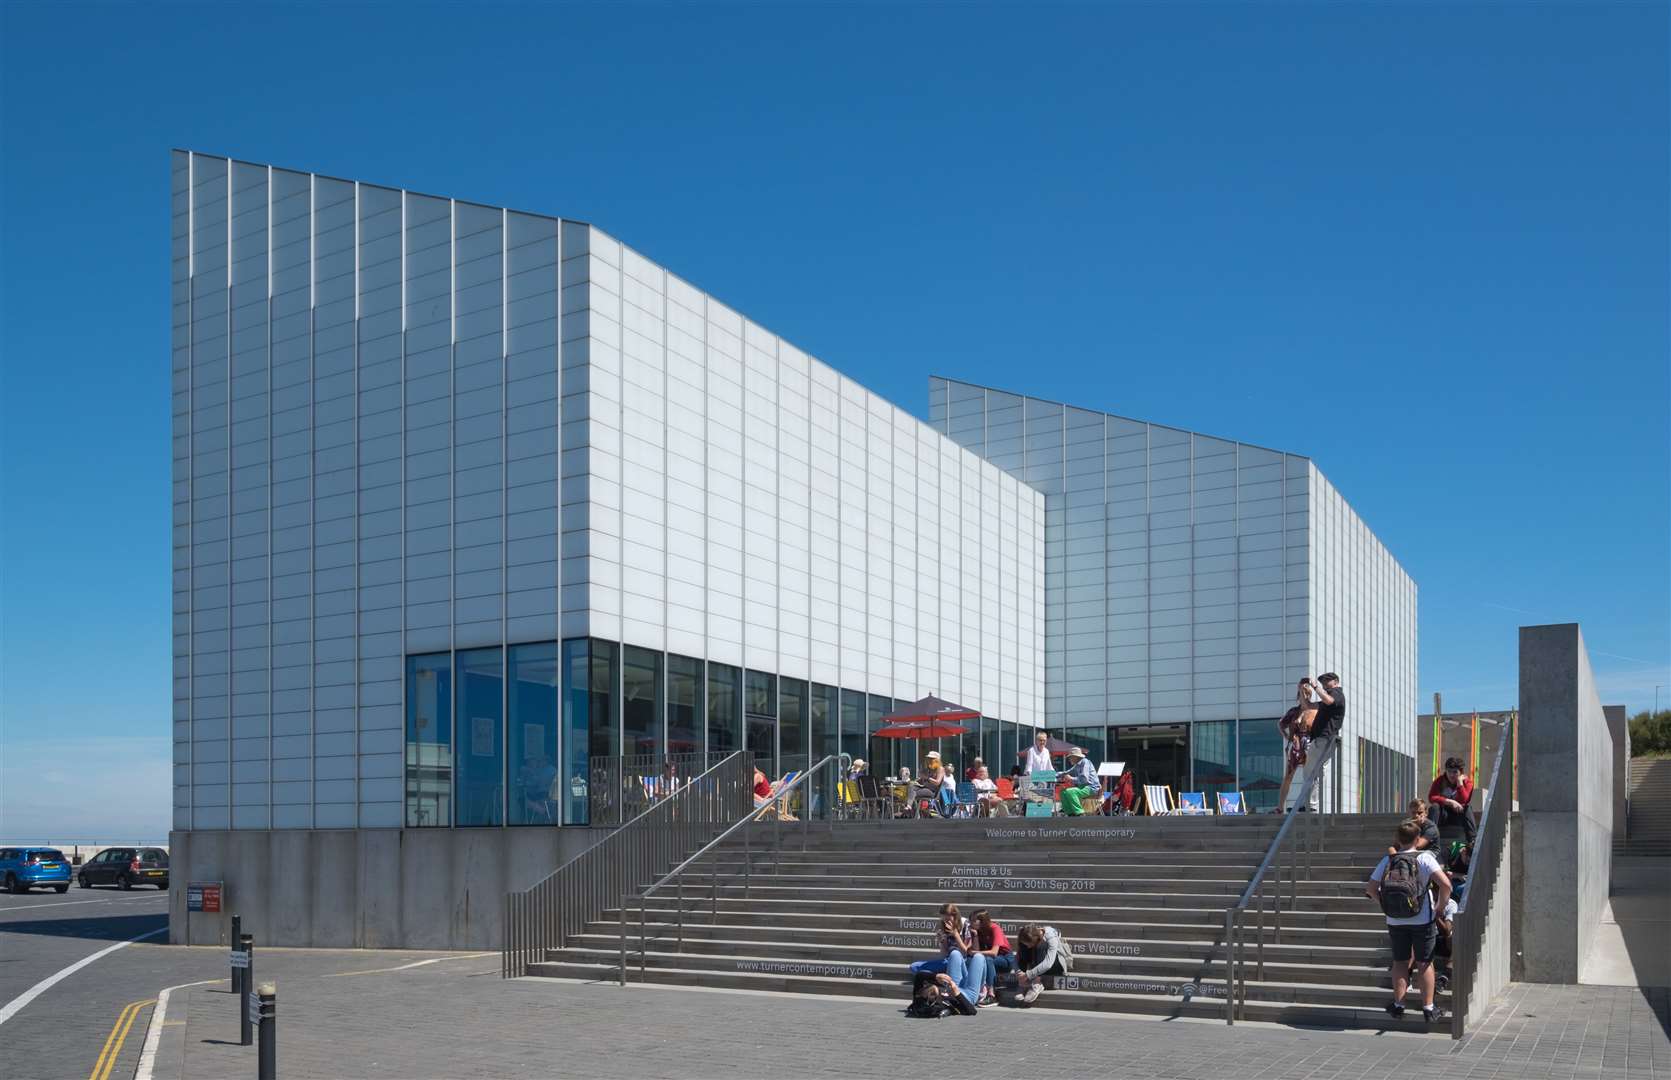 Facilities at the Turner Contemporary are to be improved